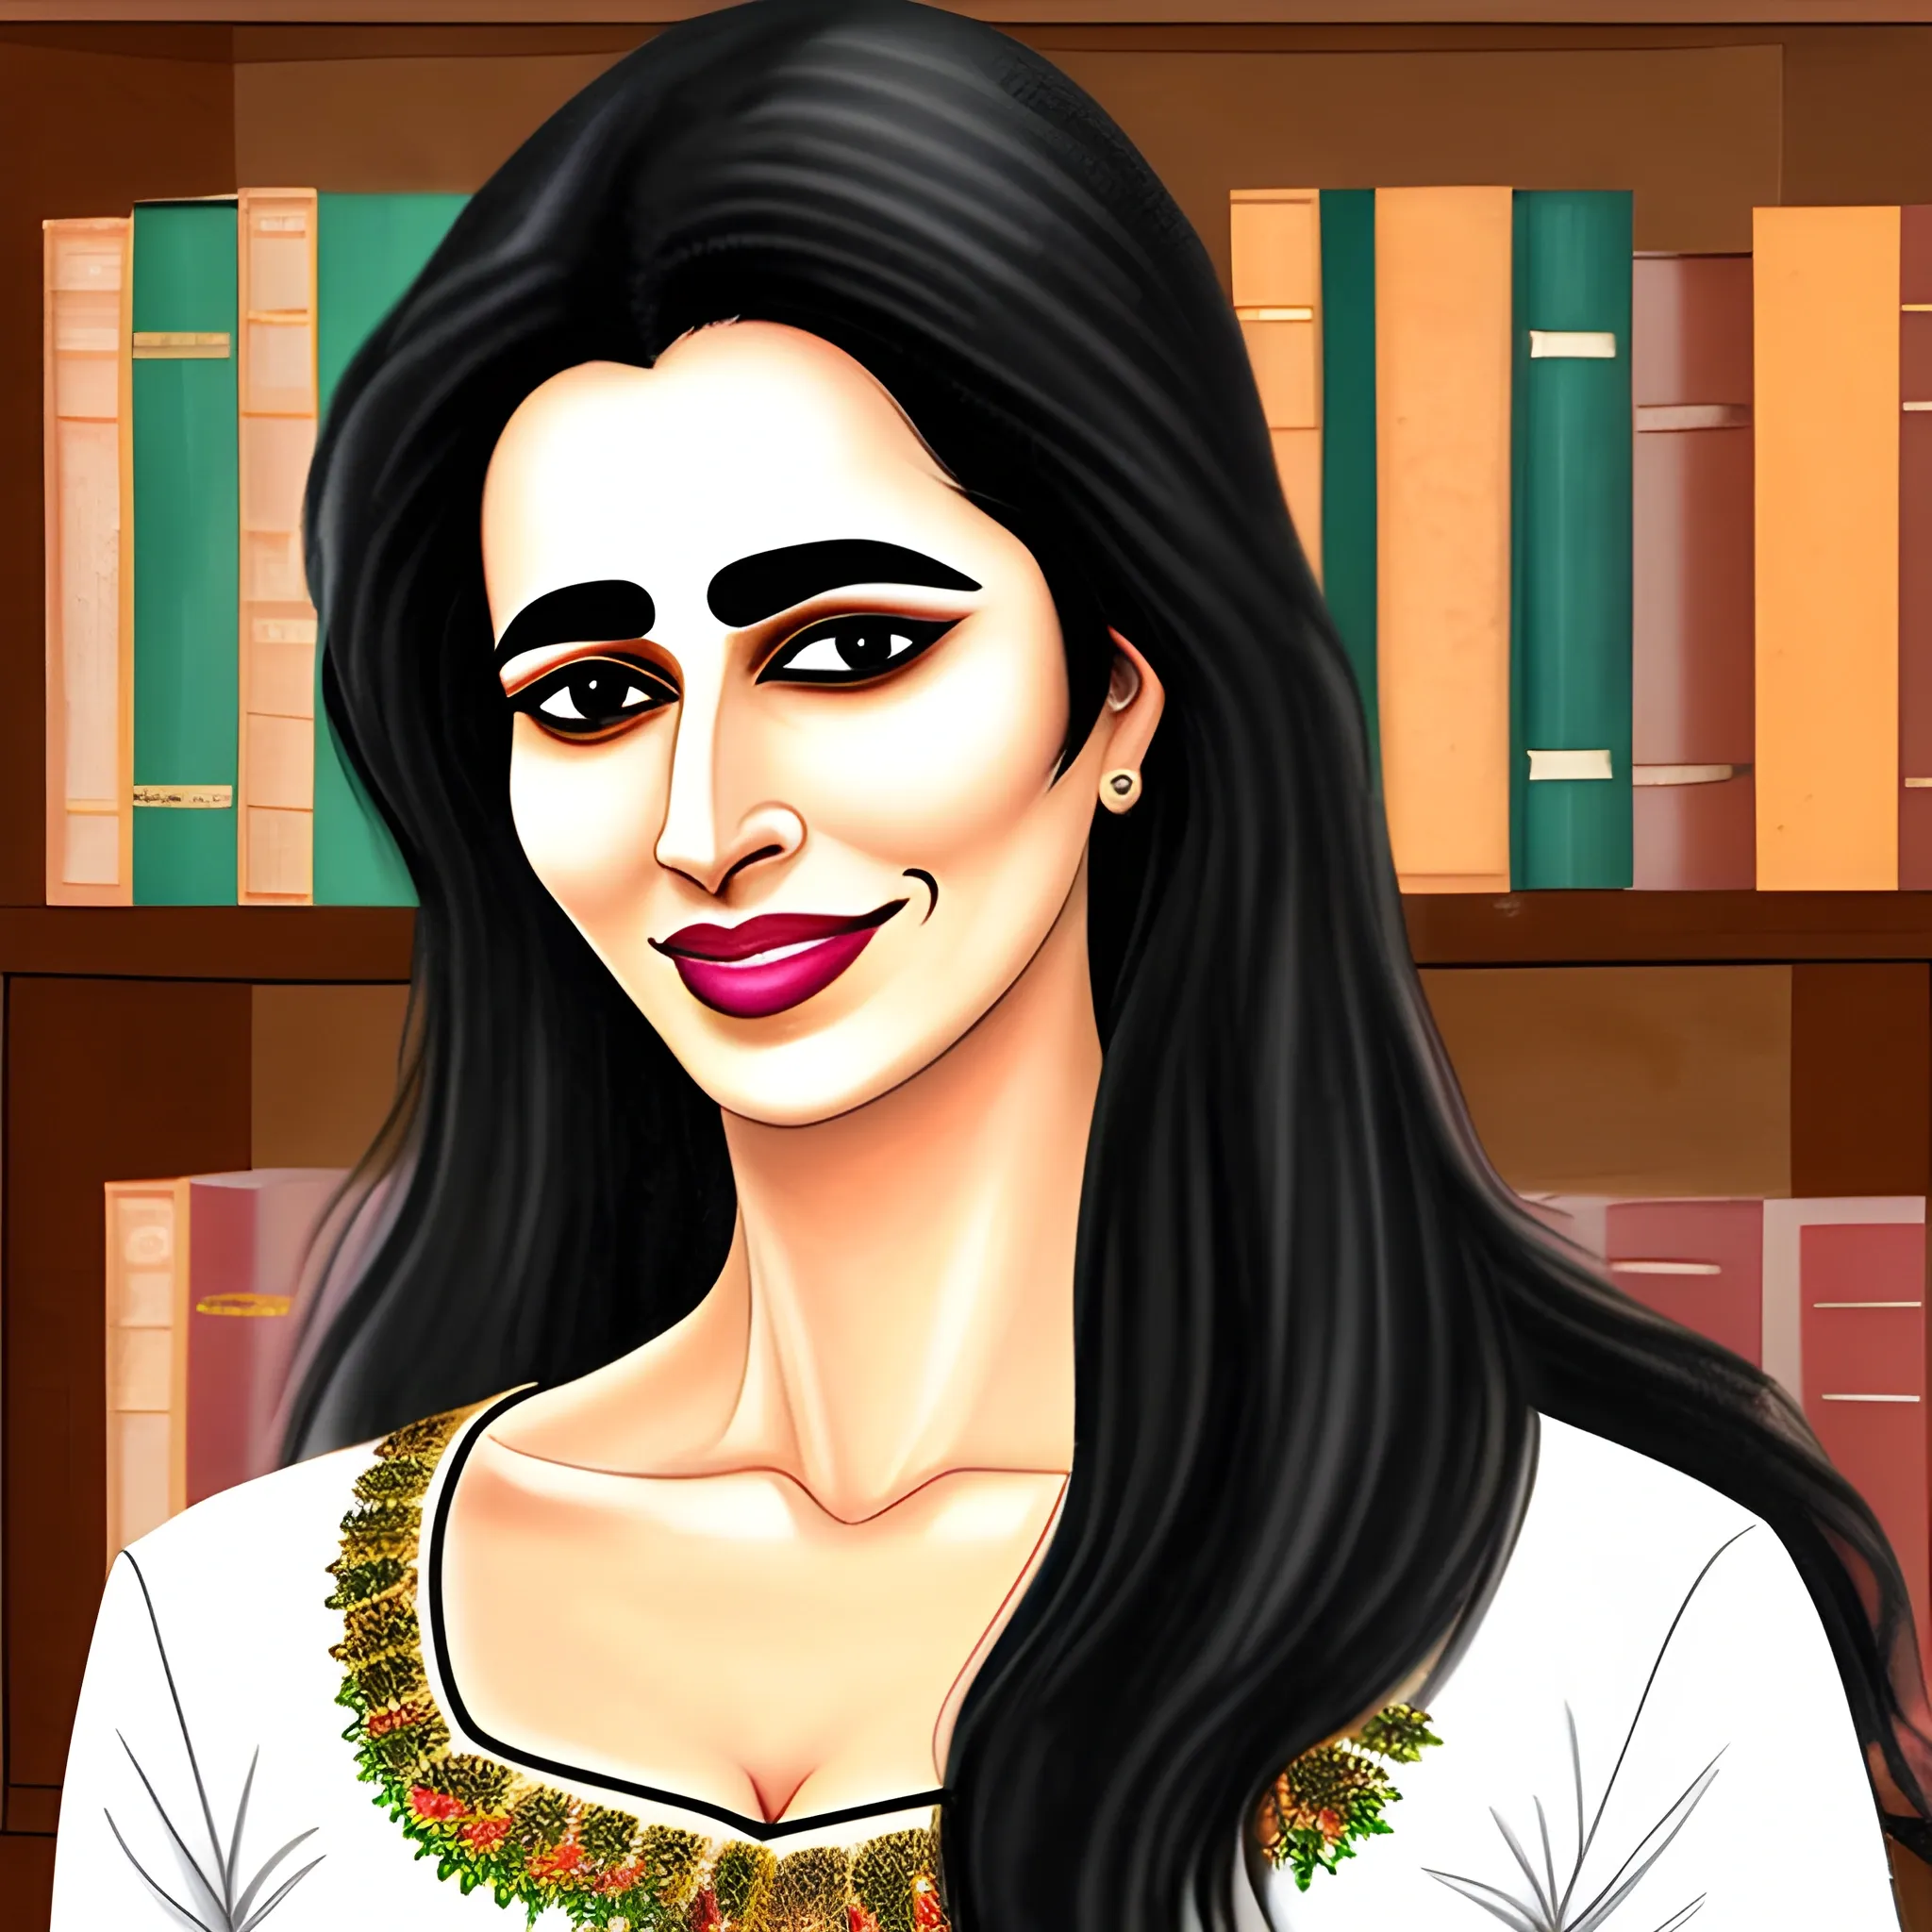 beautiful messy black hair, beautiful face, beautiful Malayali girl, in a library, wearing a kurta and churidar bottom, perfect face, perfect eyes, Oil Painting, half body portrait,  Remove: (amateur bad anatomy blurred deformed disfigured poorly drawn face poorly drawn hands signature ugly watermark extra limbs Bad teeth ugly out of frame dull eyes disfigured blurry closed eyes:1)., 